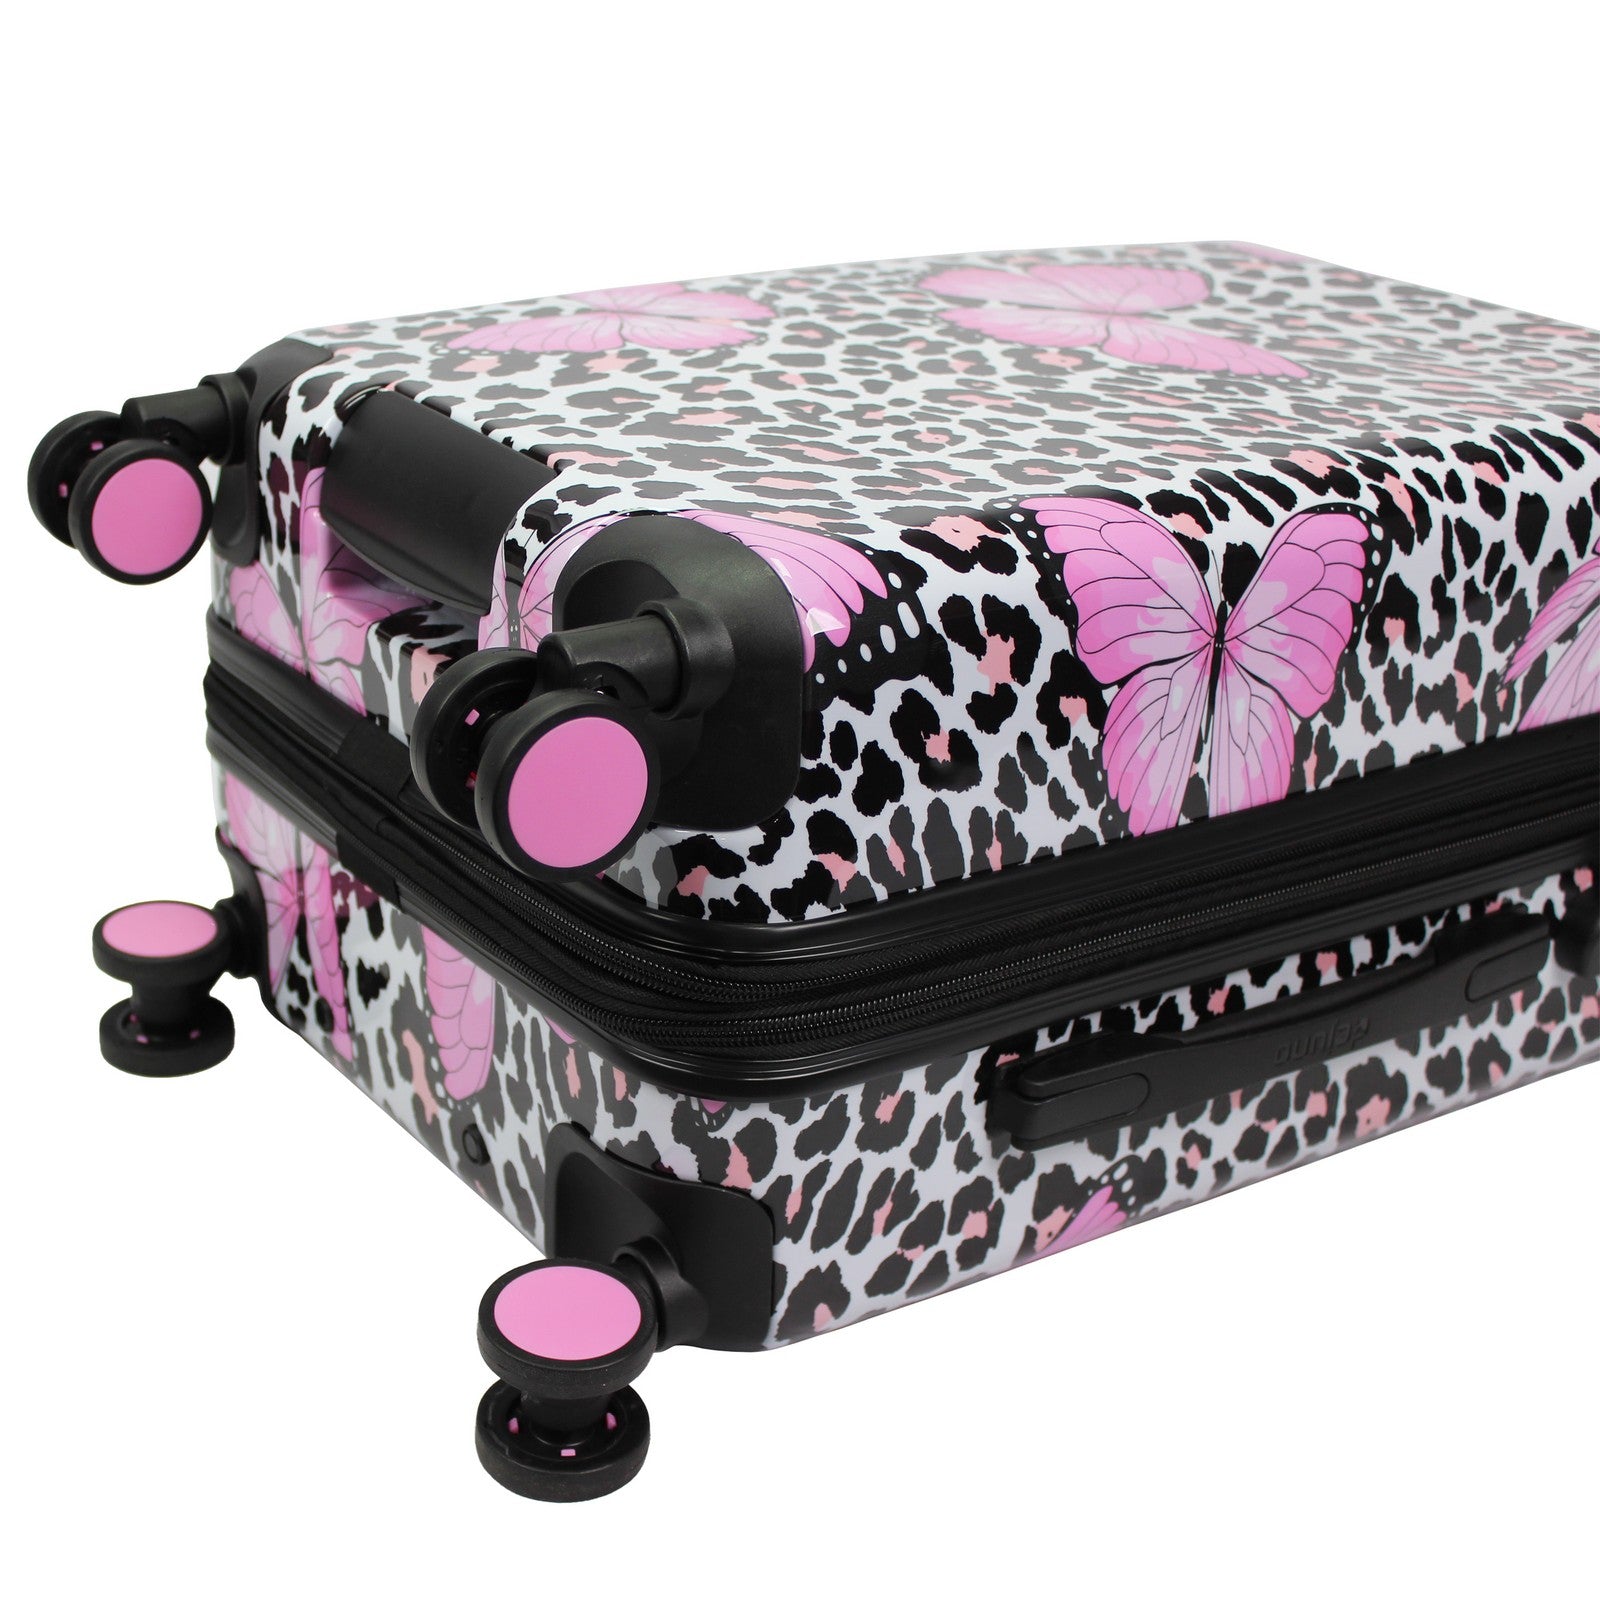 World Traveler Dejuno Butterfly Cheetah 3-Piece Expandable Spinner Luggage Set